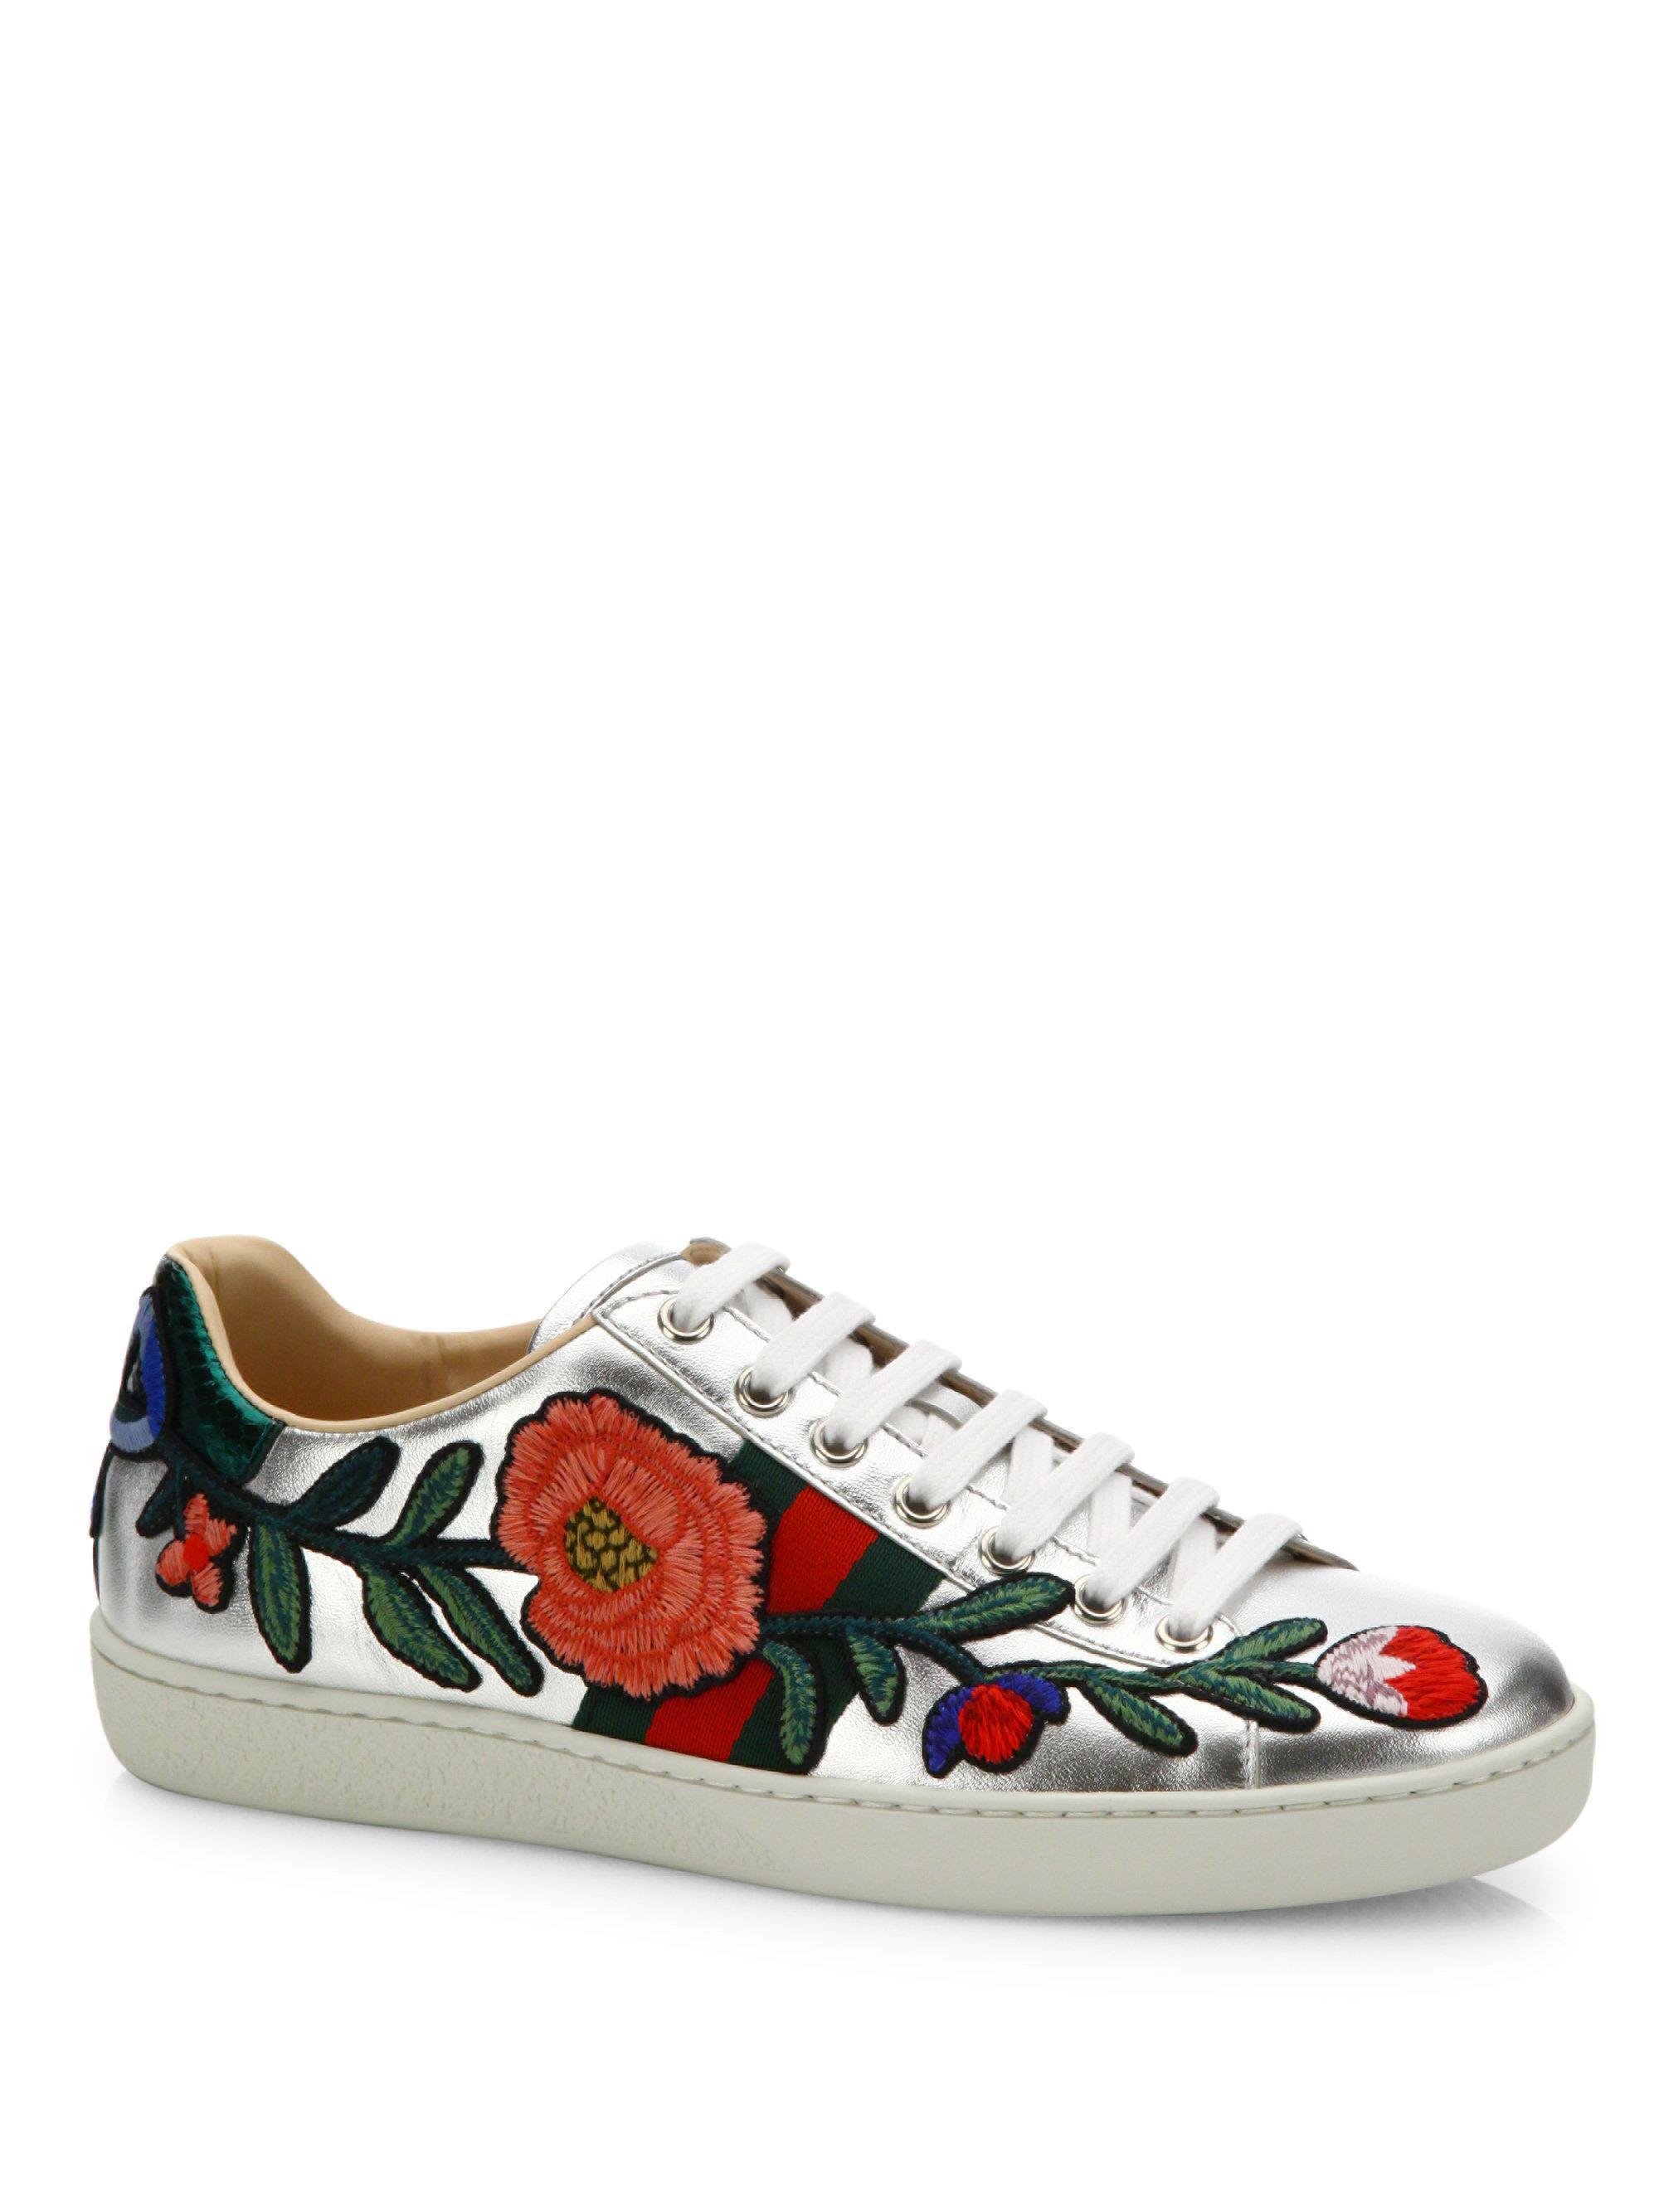 Gucci New Ace Floral-embroidered Metallic Leather Sneakers in Metallic